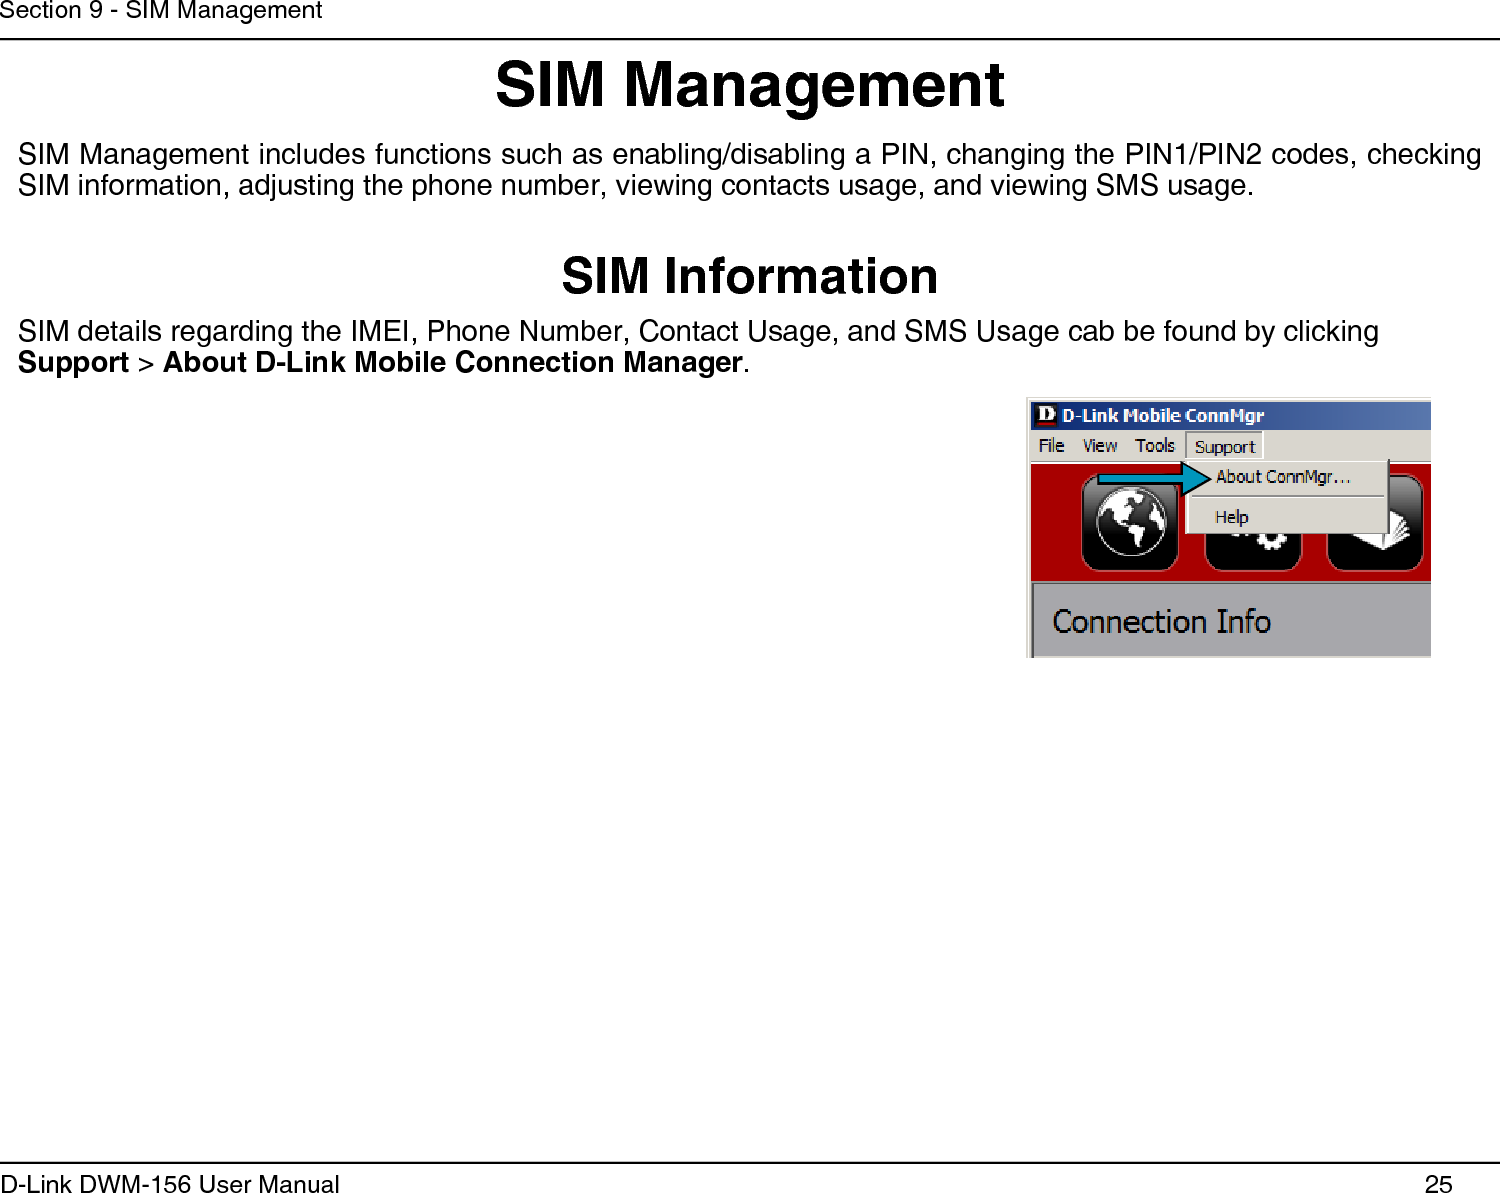 25D-Link DWM-156 User ManualSection 9 - SIM ManagementSIM ManagementSIM InformationSIM details regarding the IMEI, Phone Number, Contact Usage, and SMS Usage cab be found by clicking Support &gt; About D-Link Mobile Connection Manager.SIM Management includes functions such as enabling/disabling a PIN, changing the PIN1/PIN2 codes, checking SIM information, adjusting the phone number, viewing contacts usage, and viewing SMS usage.